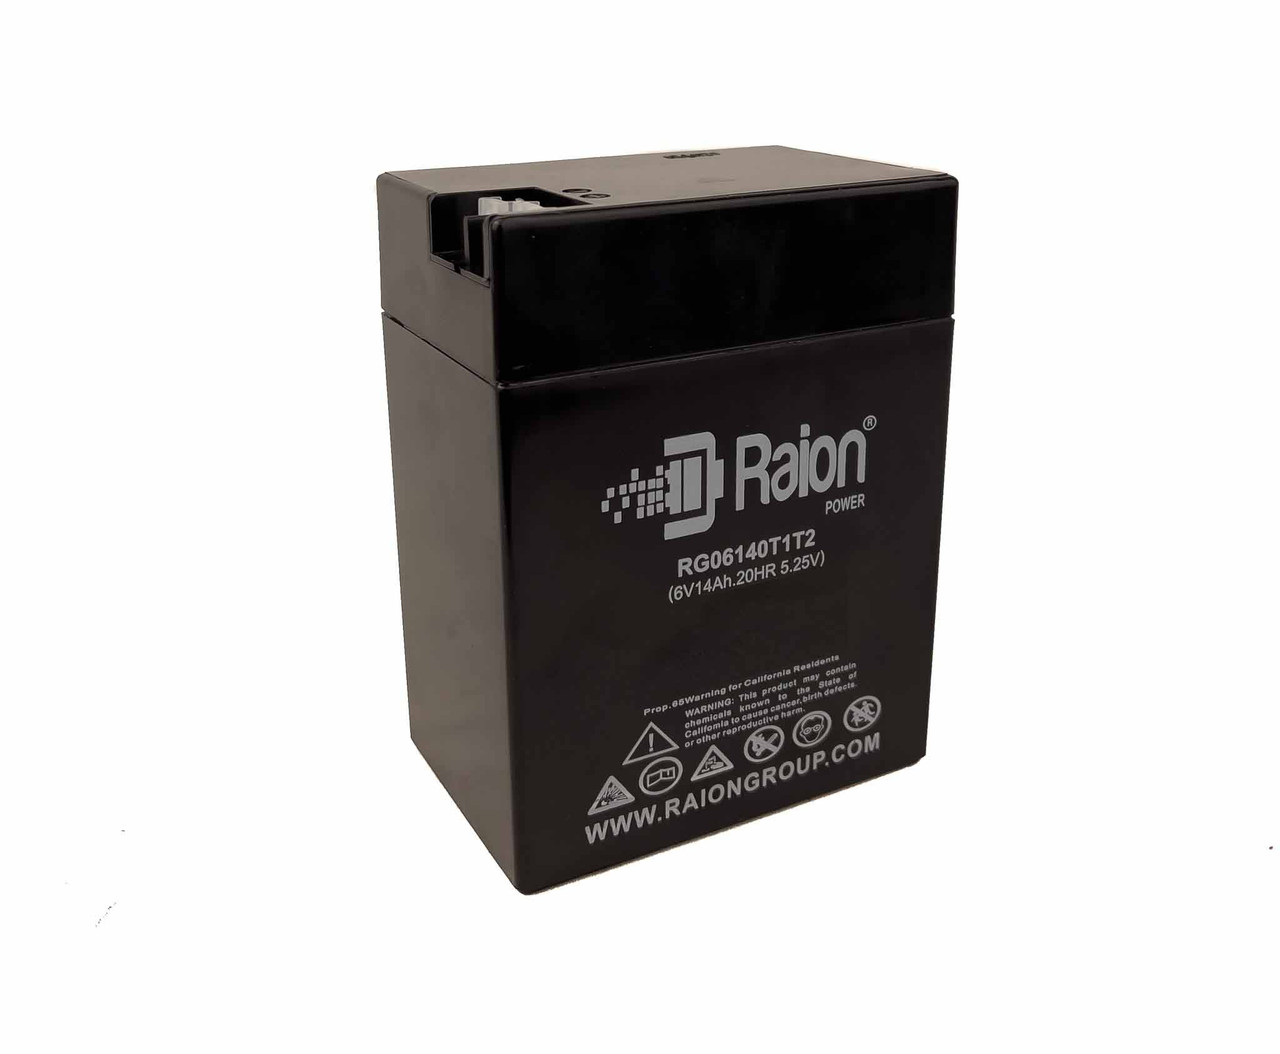 Raion Power RG06140T1T2 Non-Spillable Replacement Battery for Cycle Sound Pro 250 76118-9563